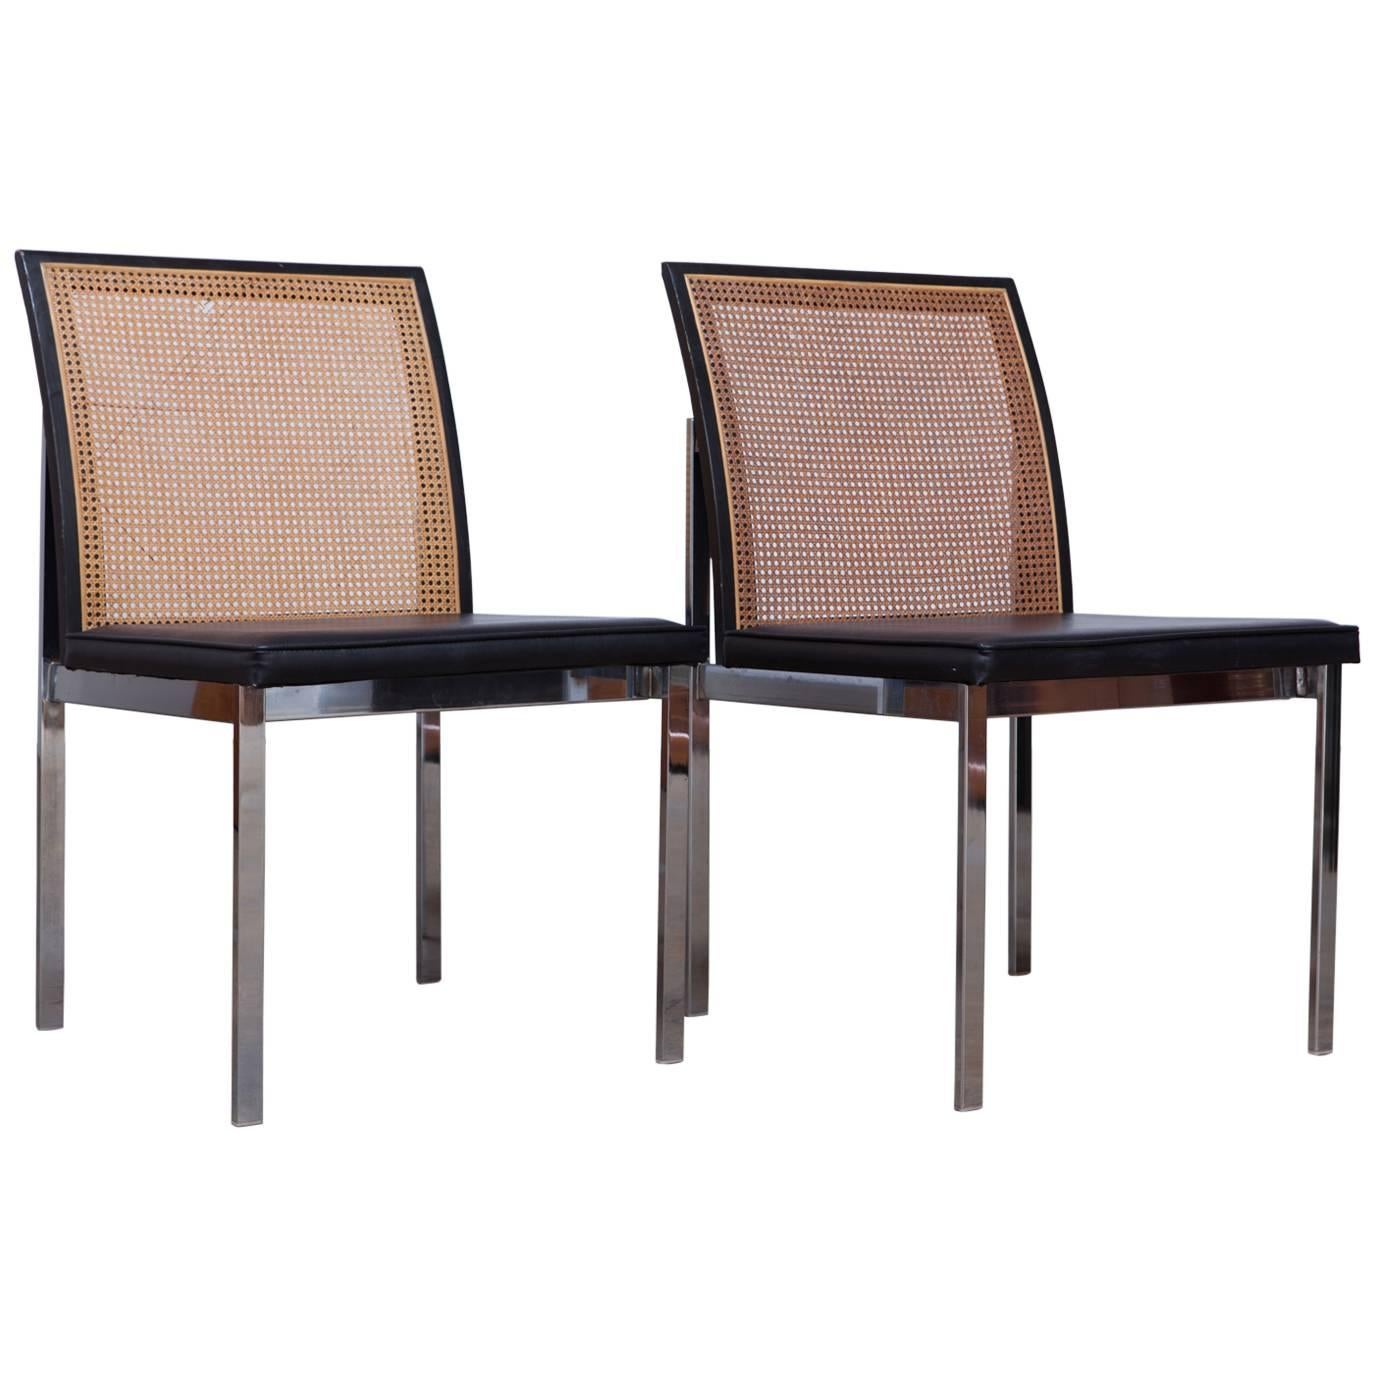 Pair of Mid-Century Chrome and Cane Chairs by Lane